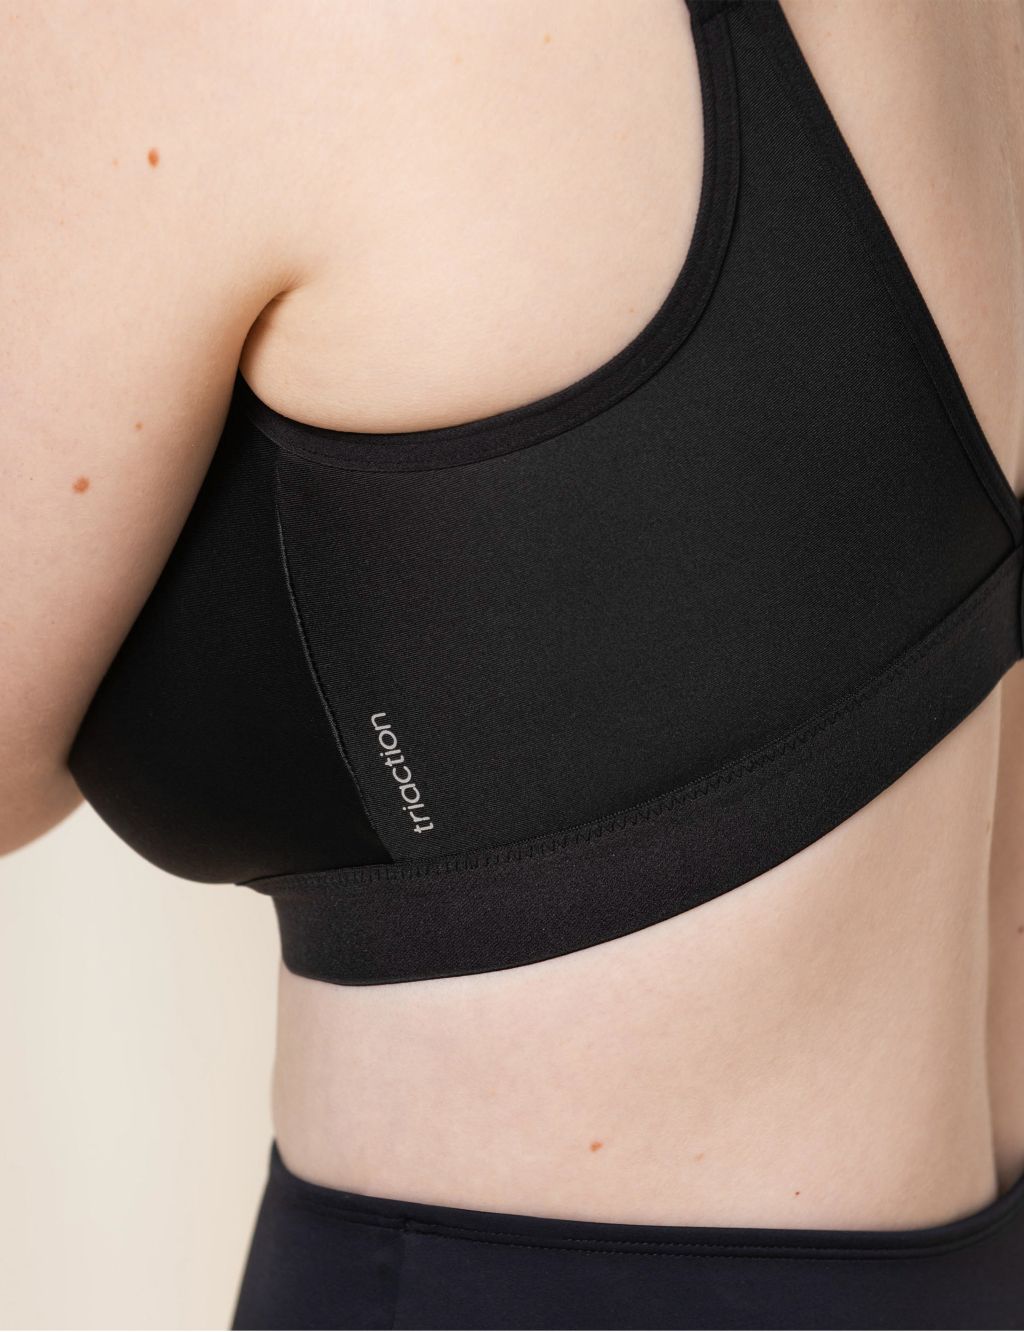 Triaction Wellness Non Wired Sports Bra image 3